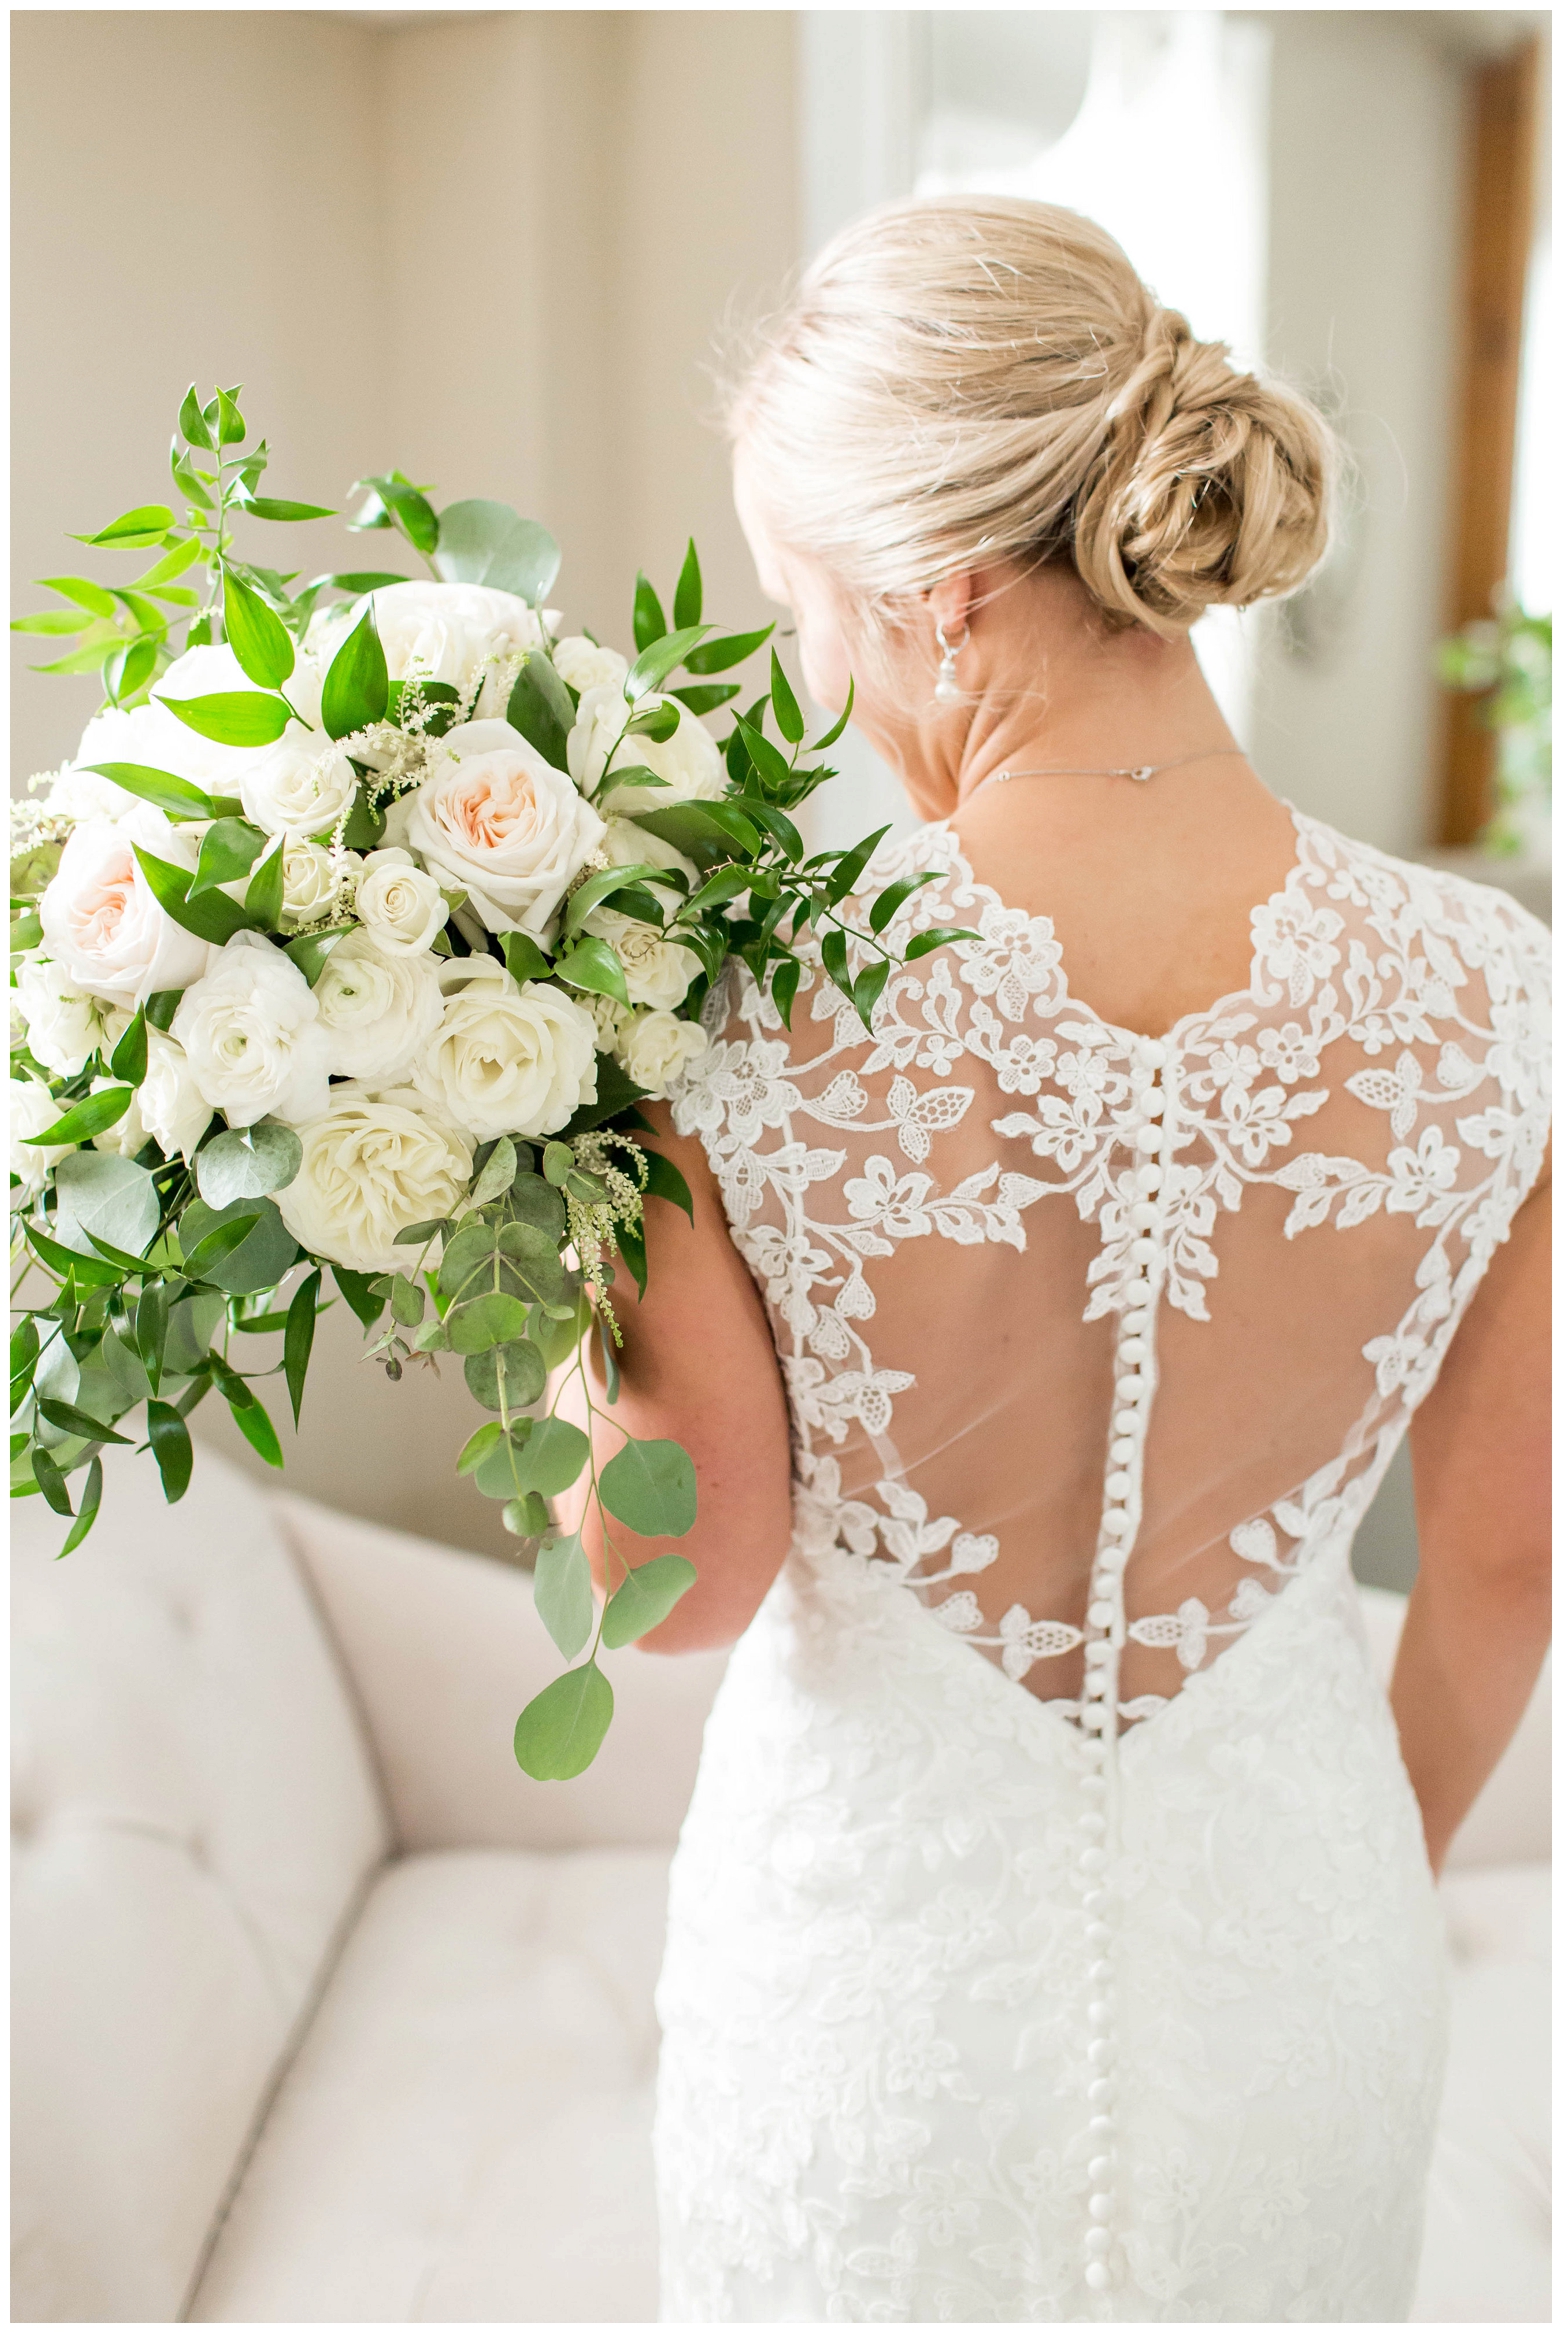 View More: http://hopetaylorphotographyphotos.pass.us/annie-and-paul-wedding